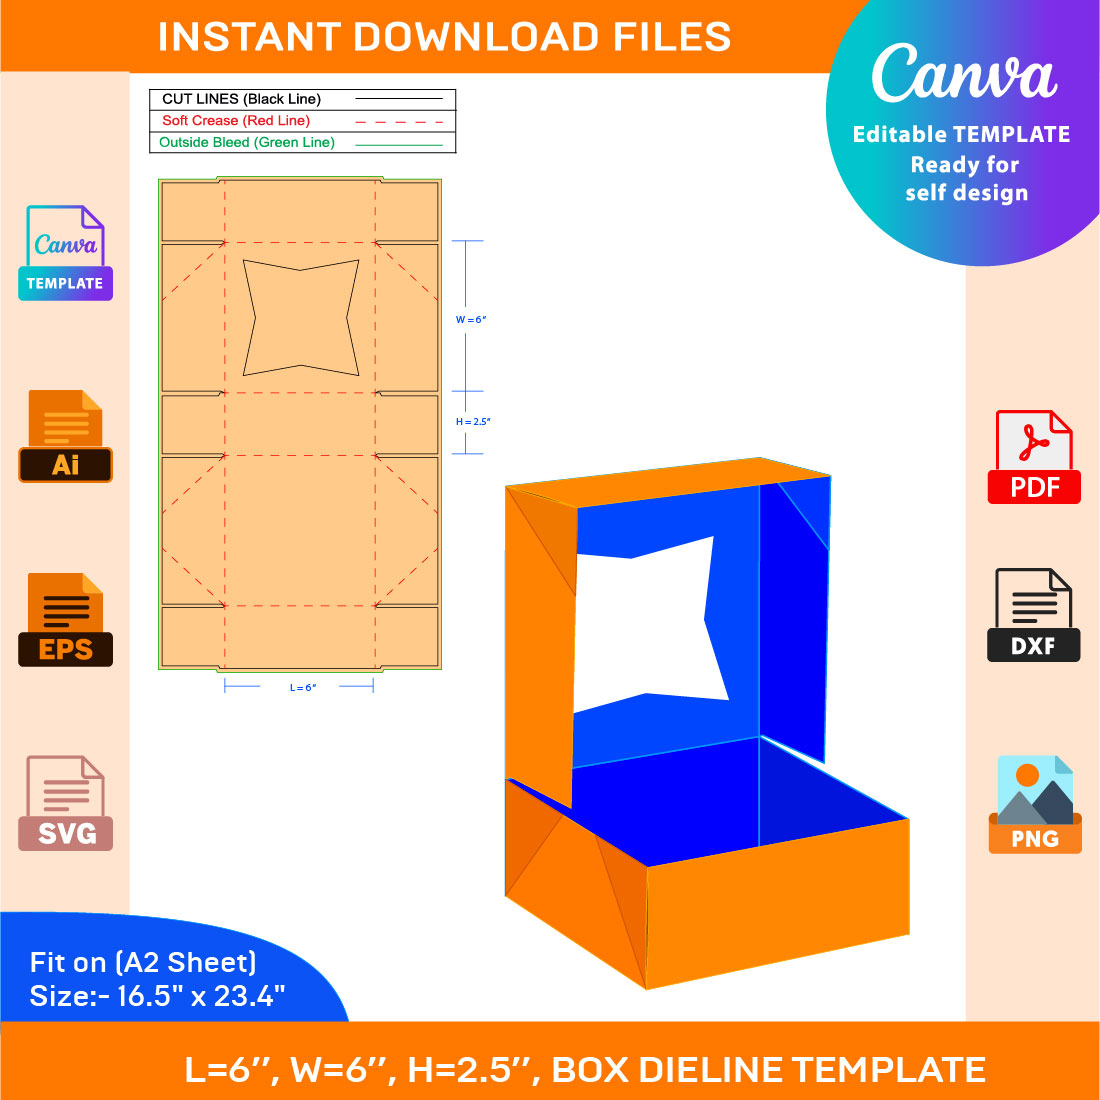 Display Pie Box, Dieline Template, SVG, EPS, PDF, DXF, Ai, PNG, JPEG cover image.